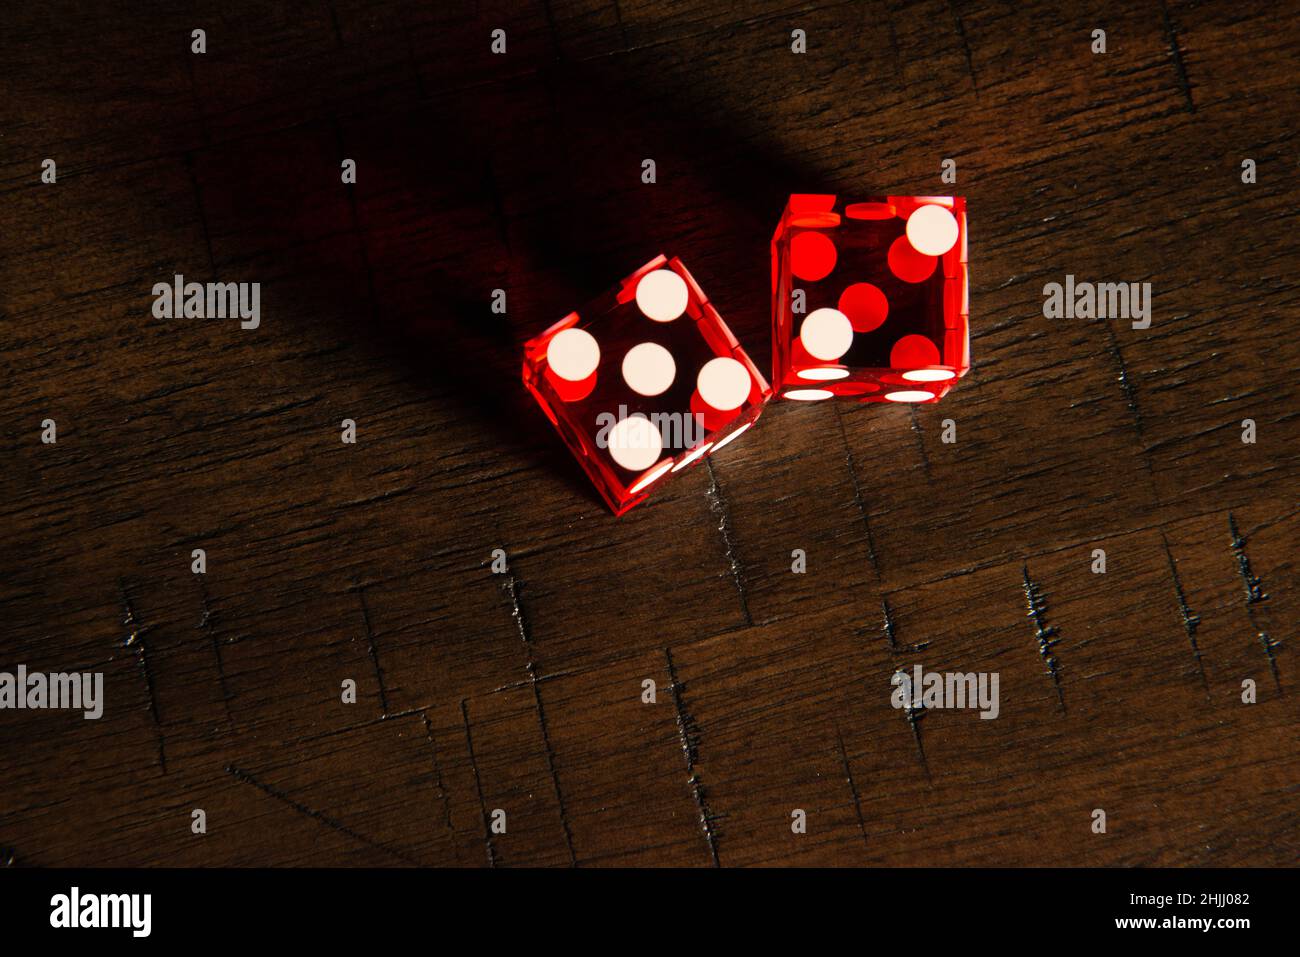 Professional casino-style dice on a wooden table under high-key lighting. Stock Photo